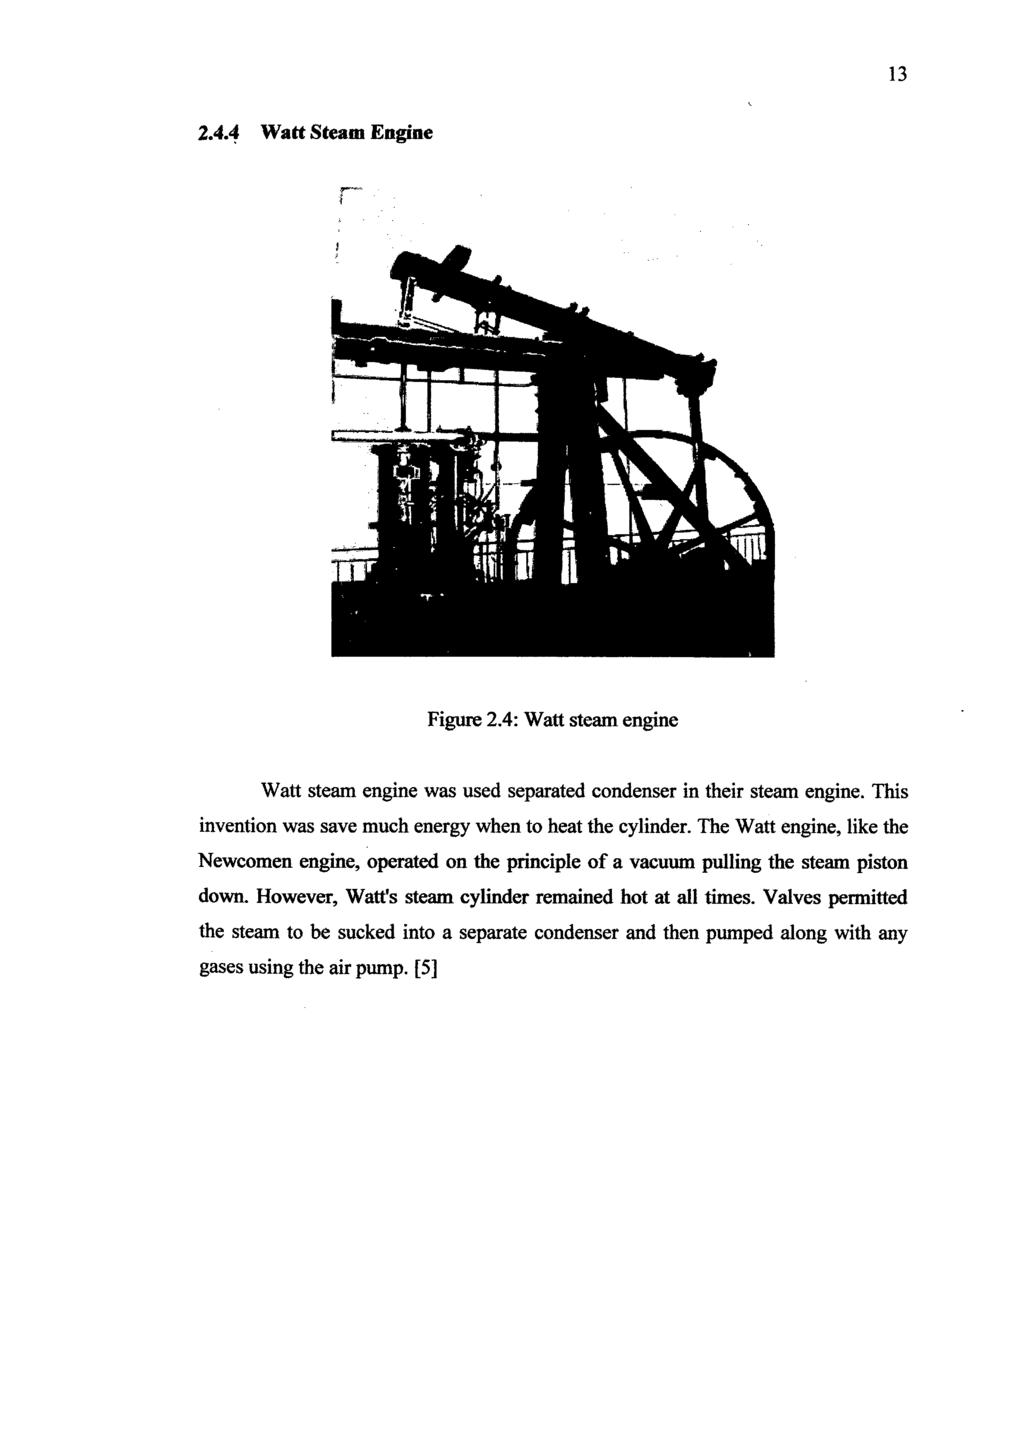 13 2.4.4 Watt Steam Engine Figure 2.4: Watt steam engine Watt steam engine was used separated condenser in their steam engine. This invention was save much energy when to heat the cylinder.